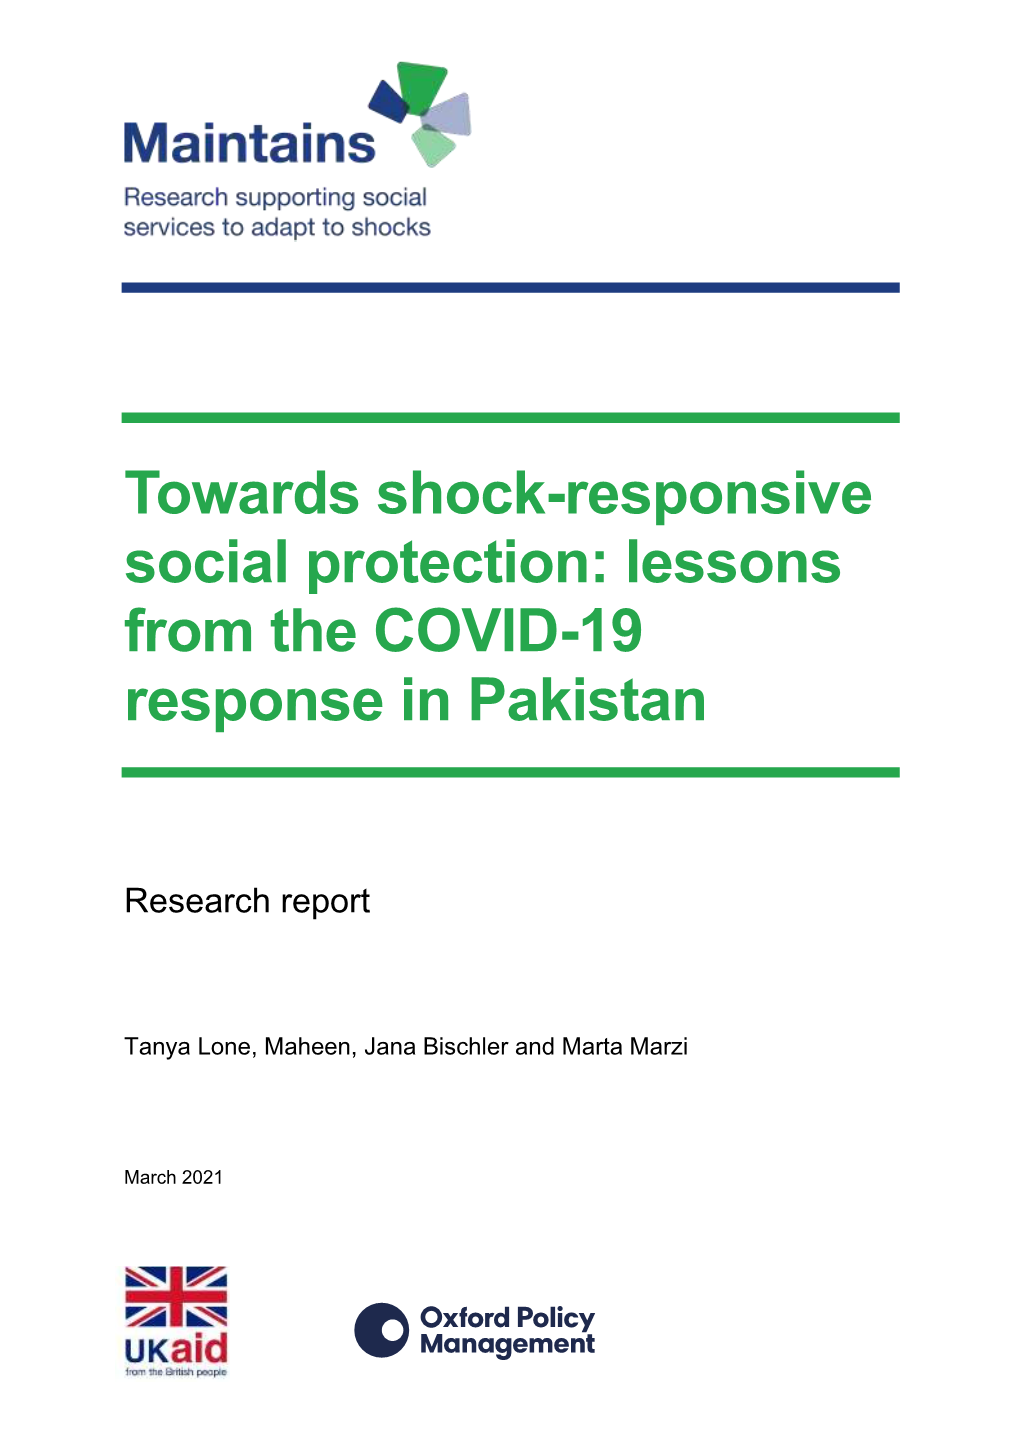 Lessons from the COVID-19 Response in Pakistan